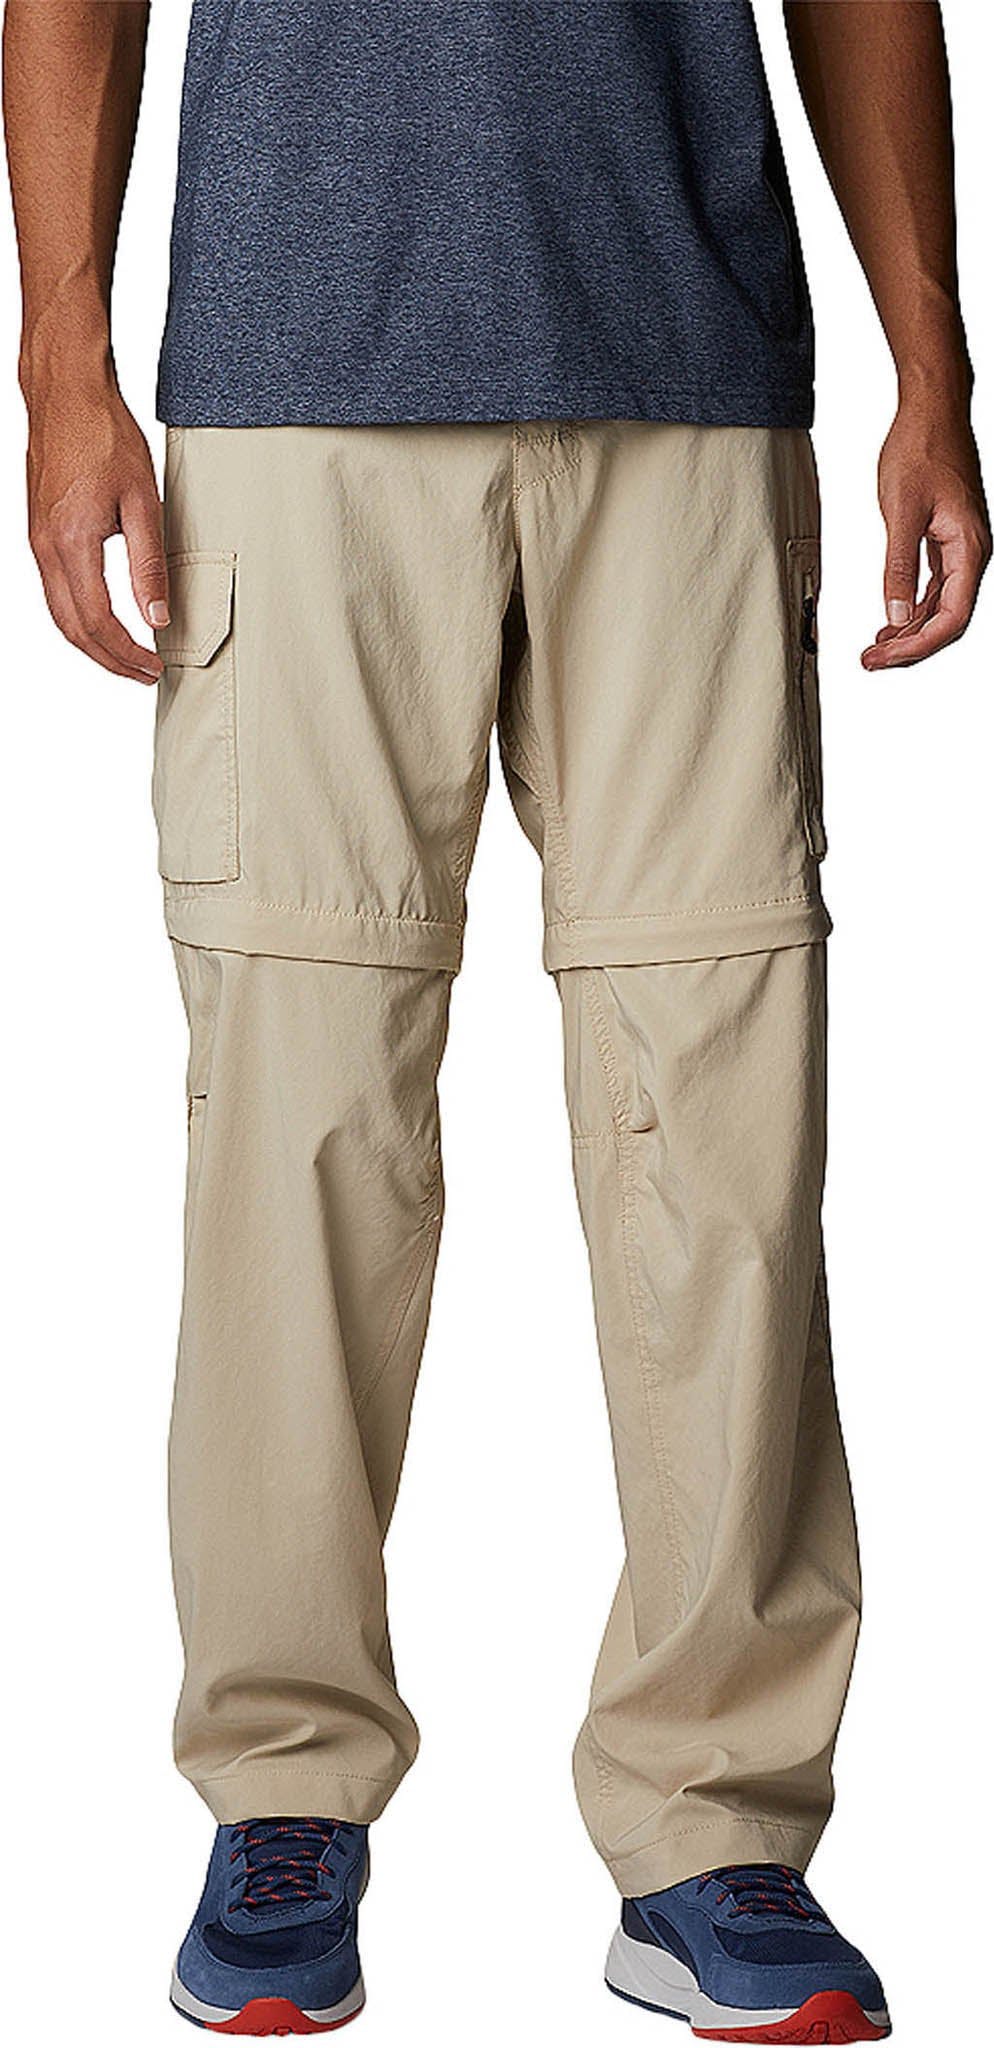 Product image for Silver Ridge™ Utility Convertible Pant - Big size - Men's